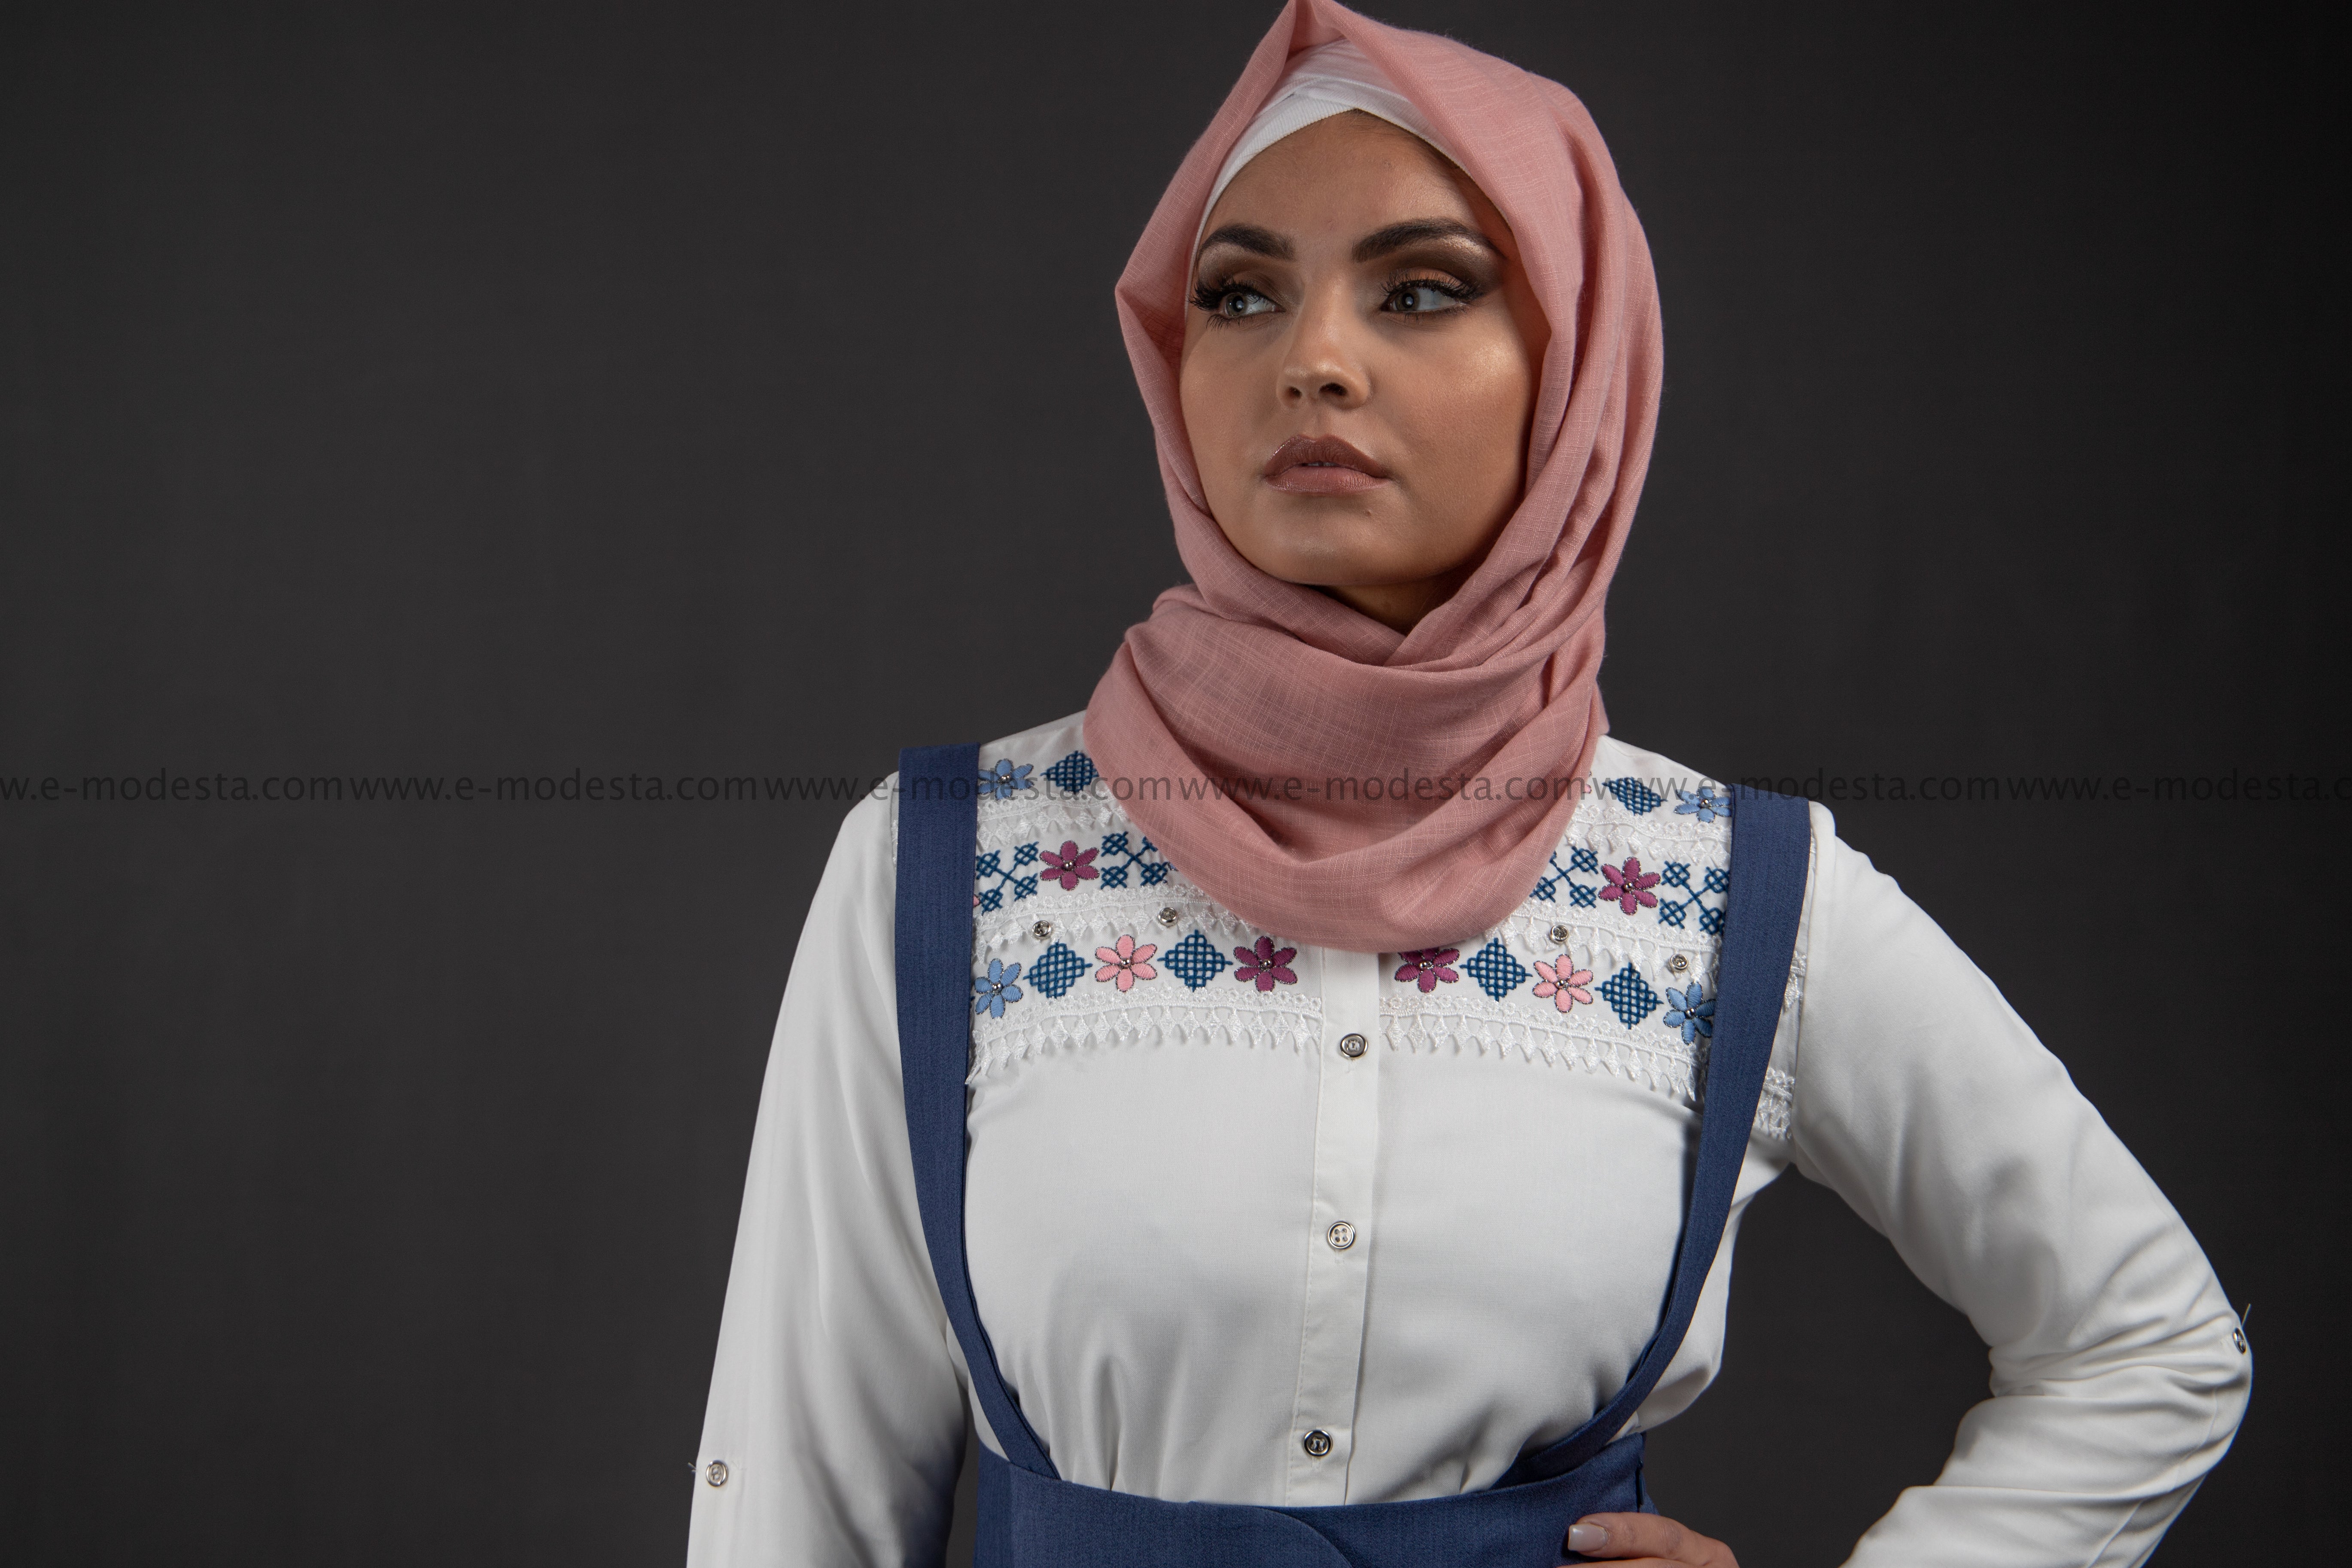 SALE Summer White Shirt | Flowers Embroidery | Blue and Pink - E-Modesta